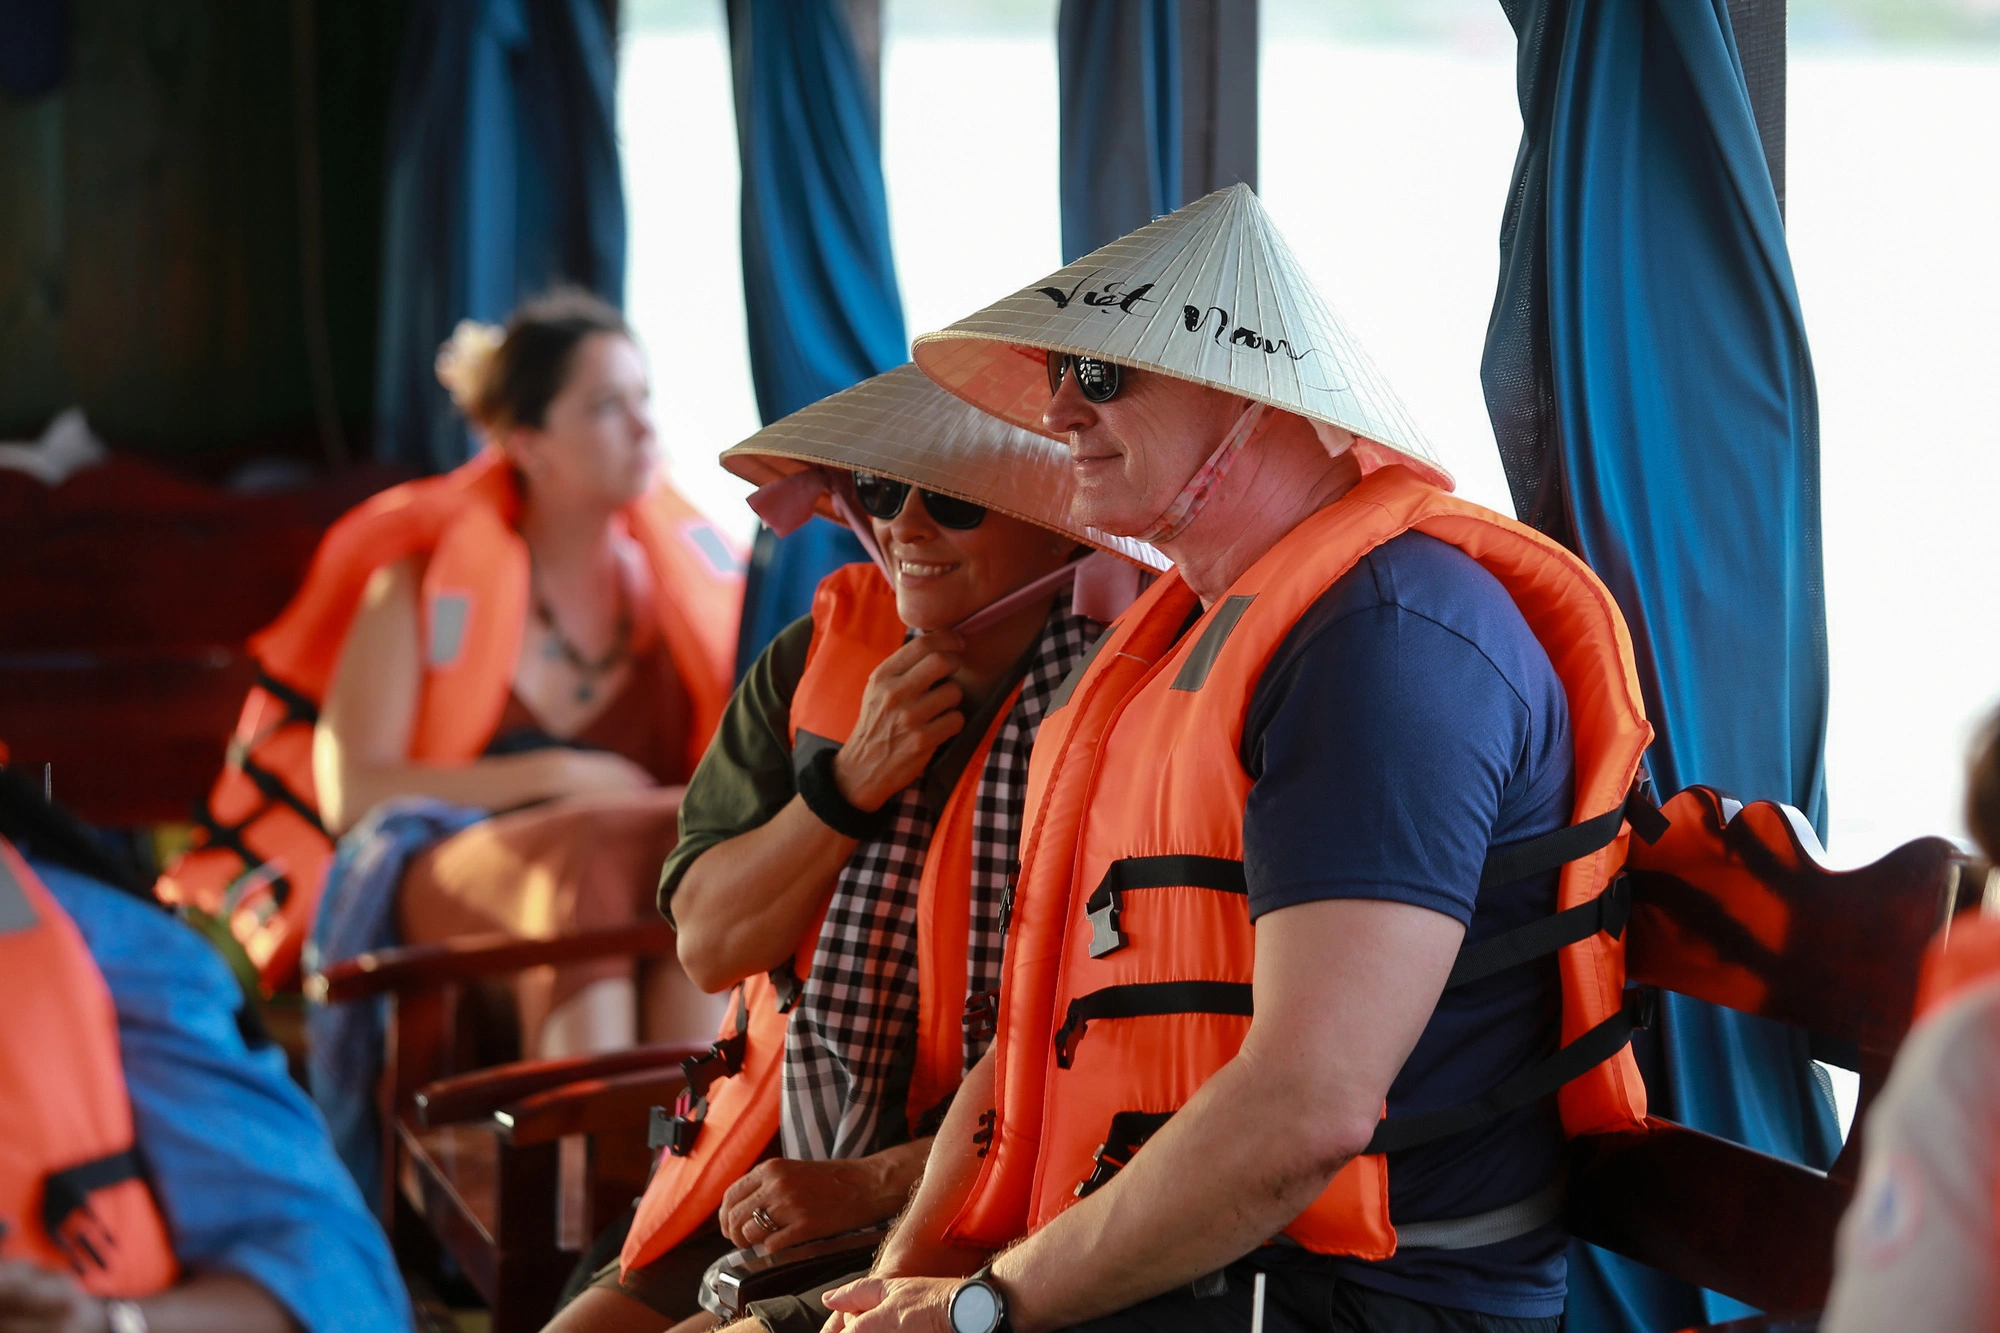 Foreign visitors admire the landscapes as they travel by boat to Thoi Son Isle, located on the Tien River in Tien Giang Province, southern Vietnam. Photo: Phuong Quyen / Tuoi Tre